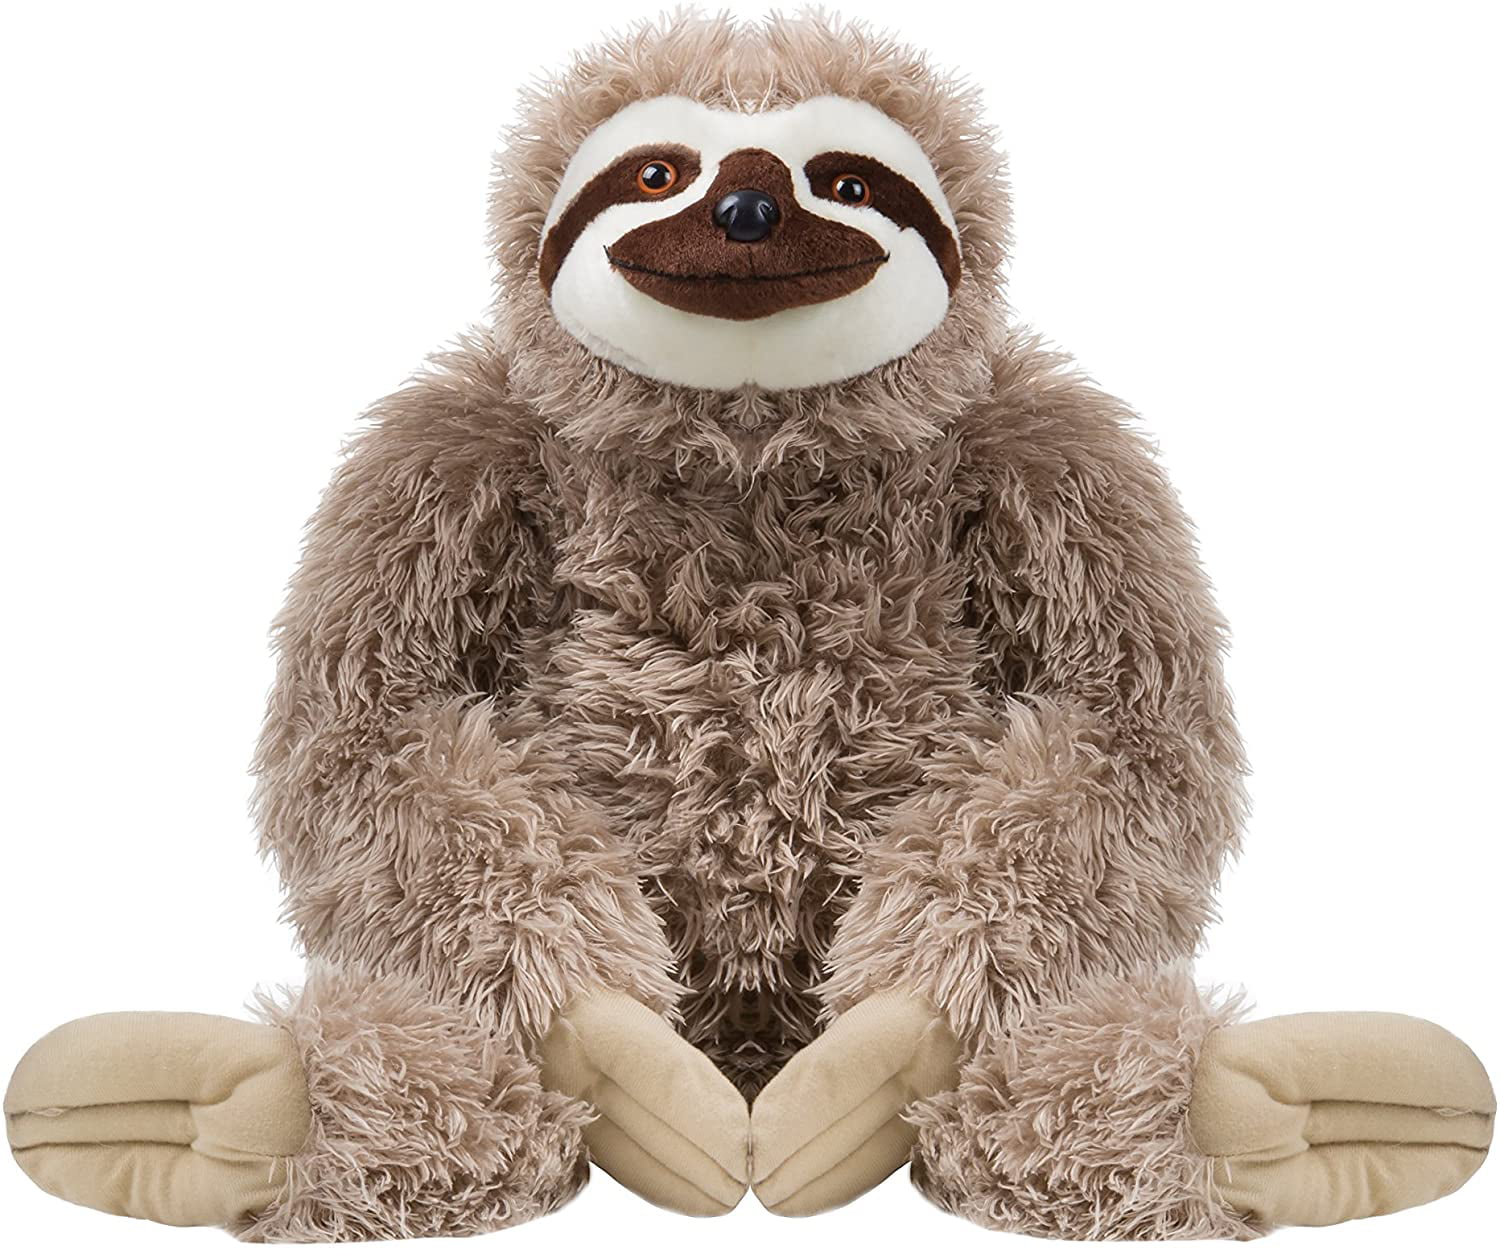 Make Your Own Stuffed Animal Cuddly Soft Cuddly Lacey the Sloth Kit 16" No Sew 